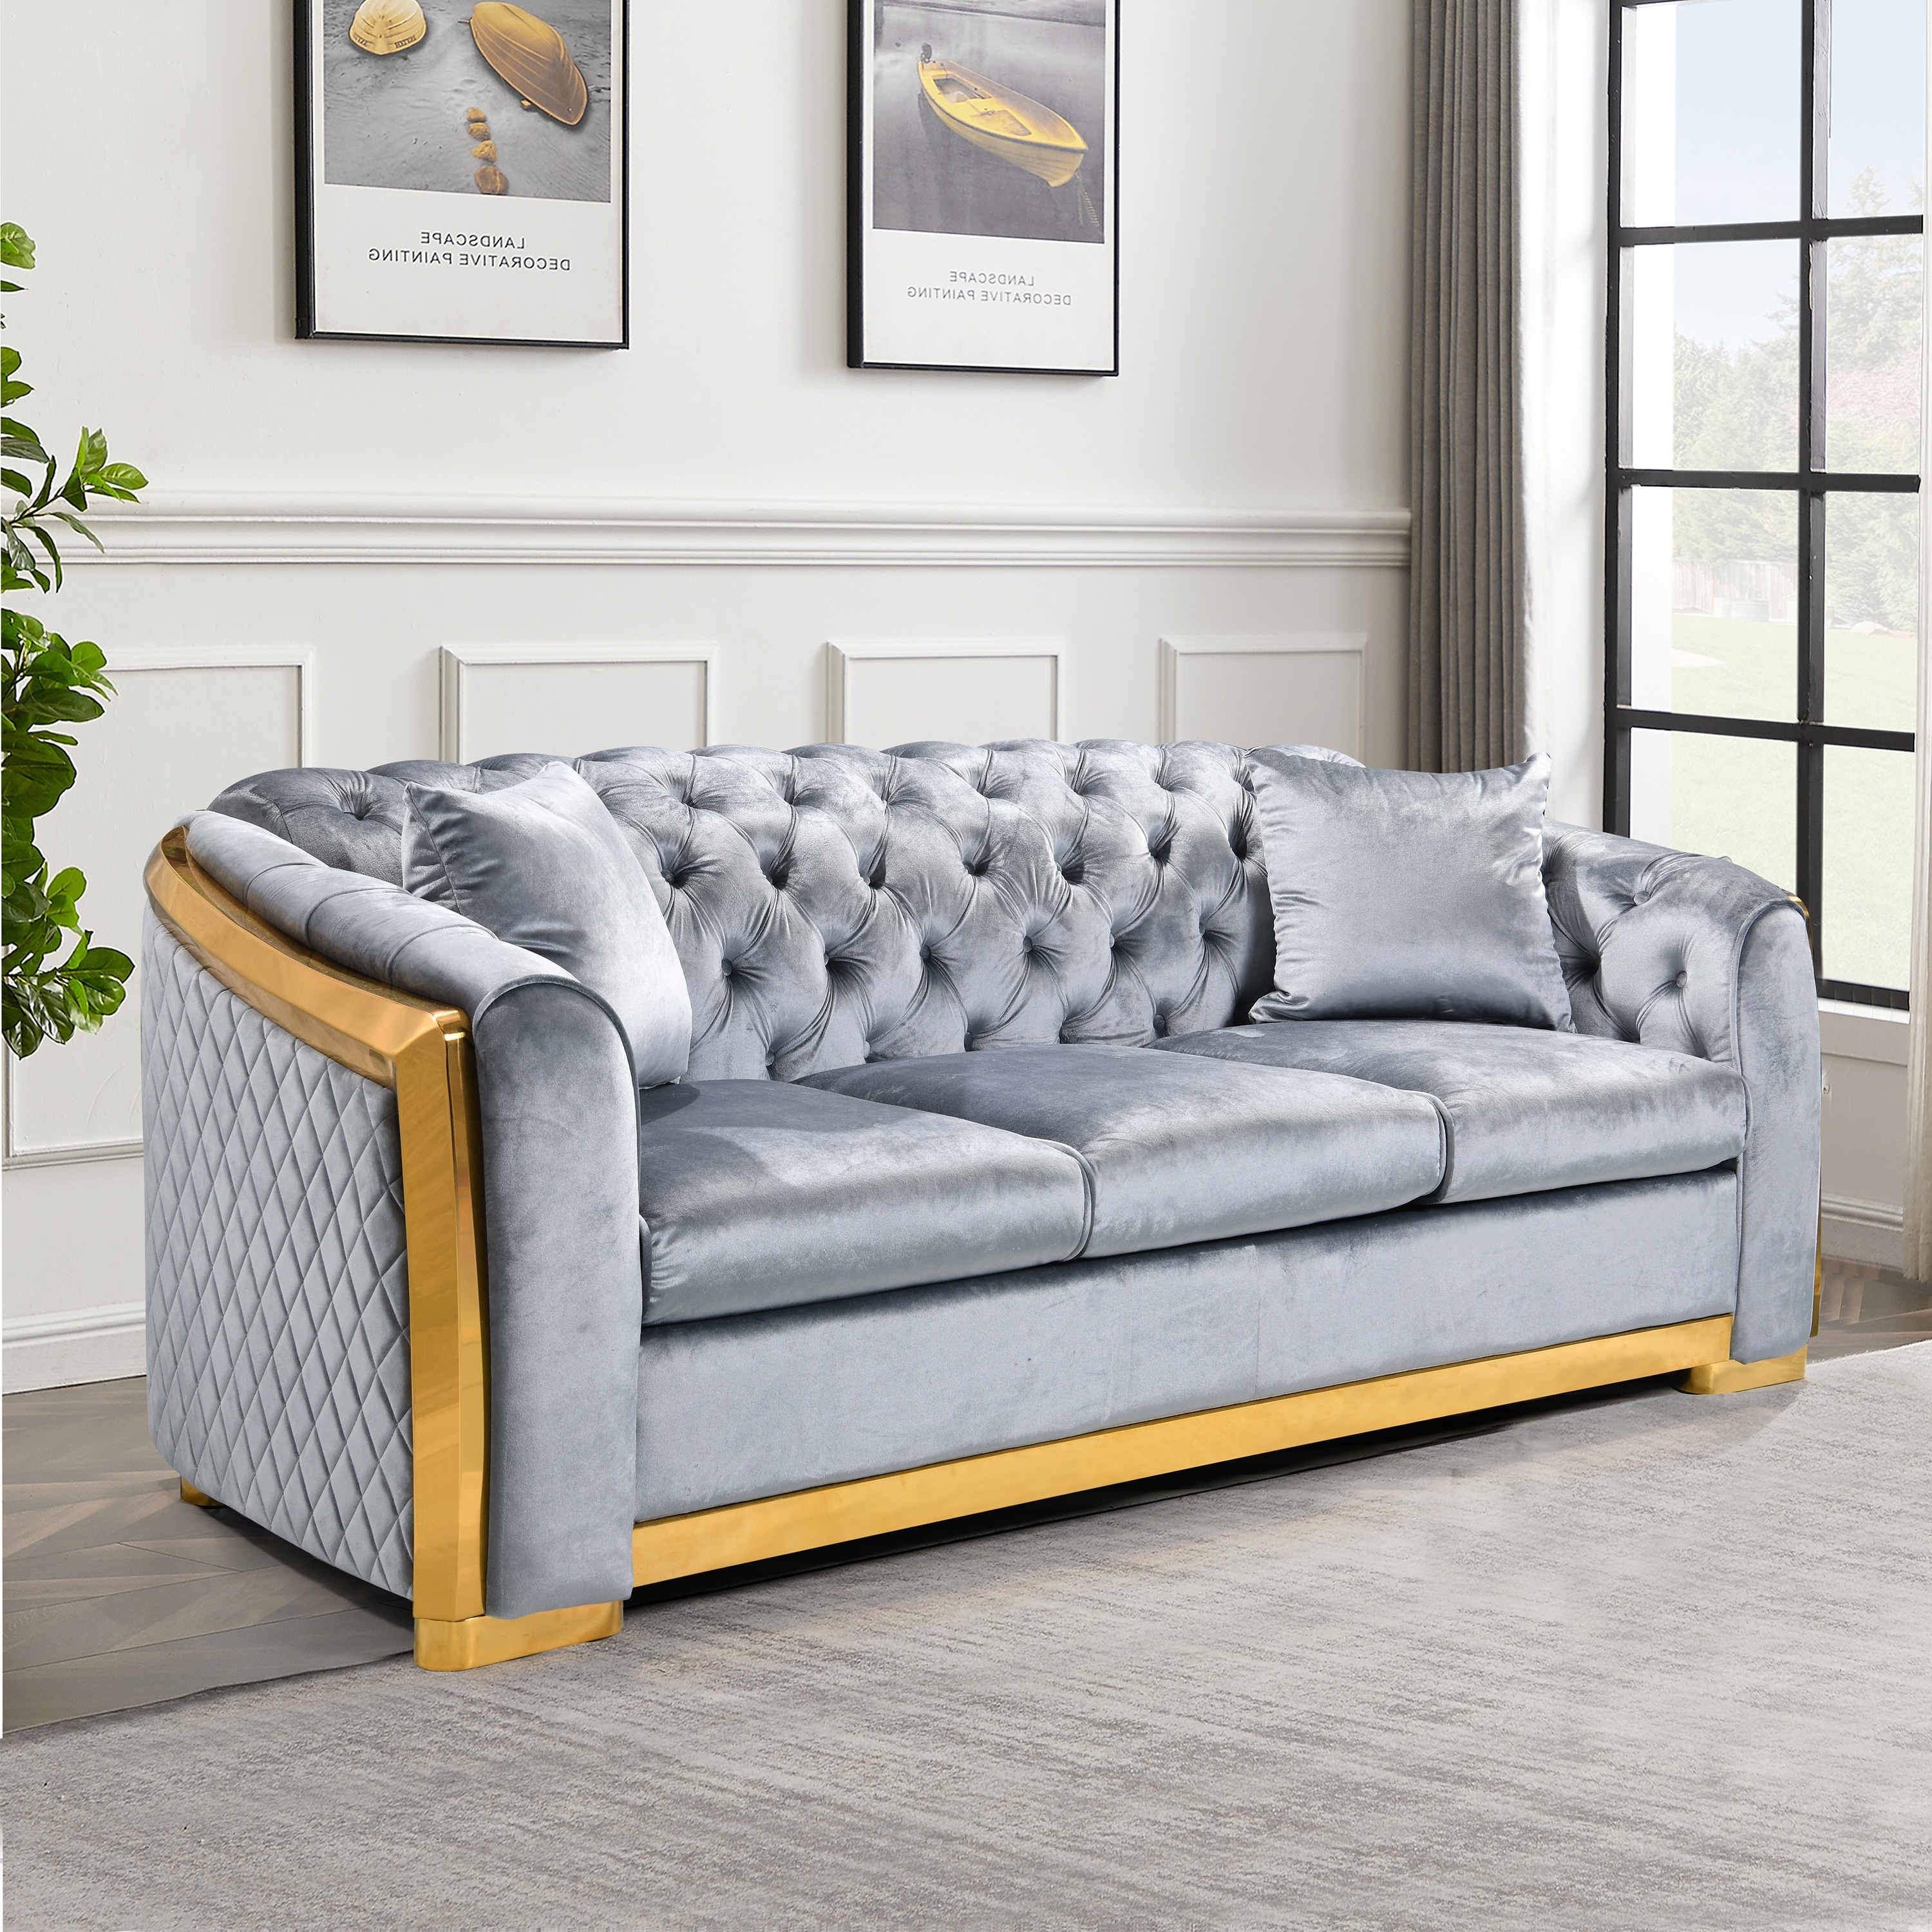 Velvet Luxury Chesterfield Sofa Set, 84 Inches Tufted Seat Couch With Gold  Stainless For Living Room, Fabric